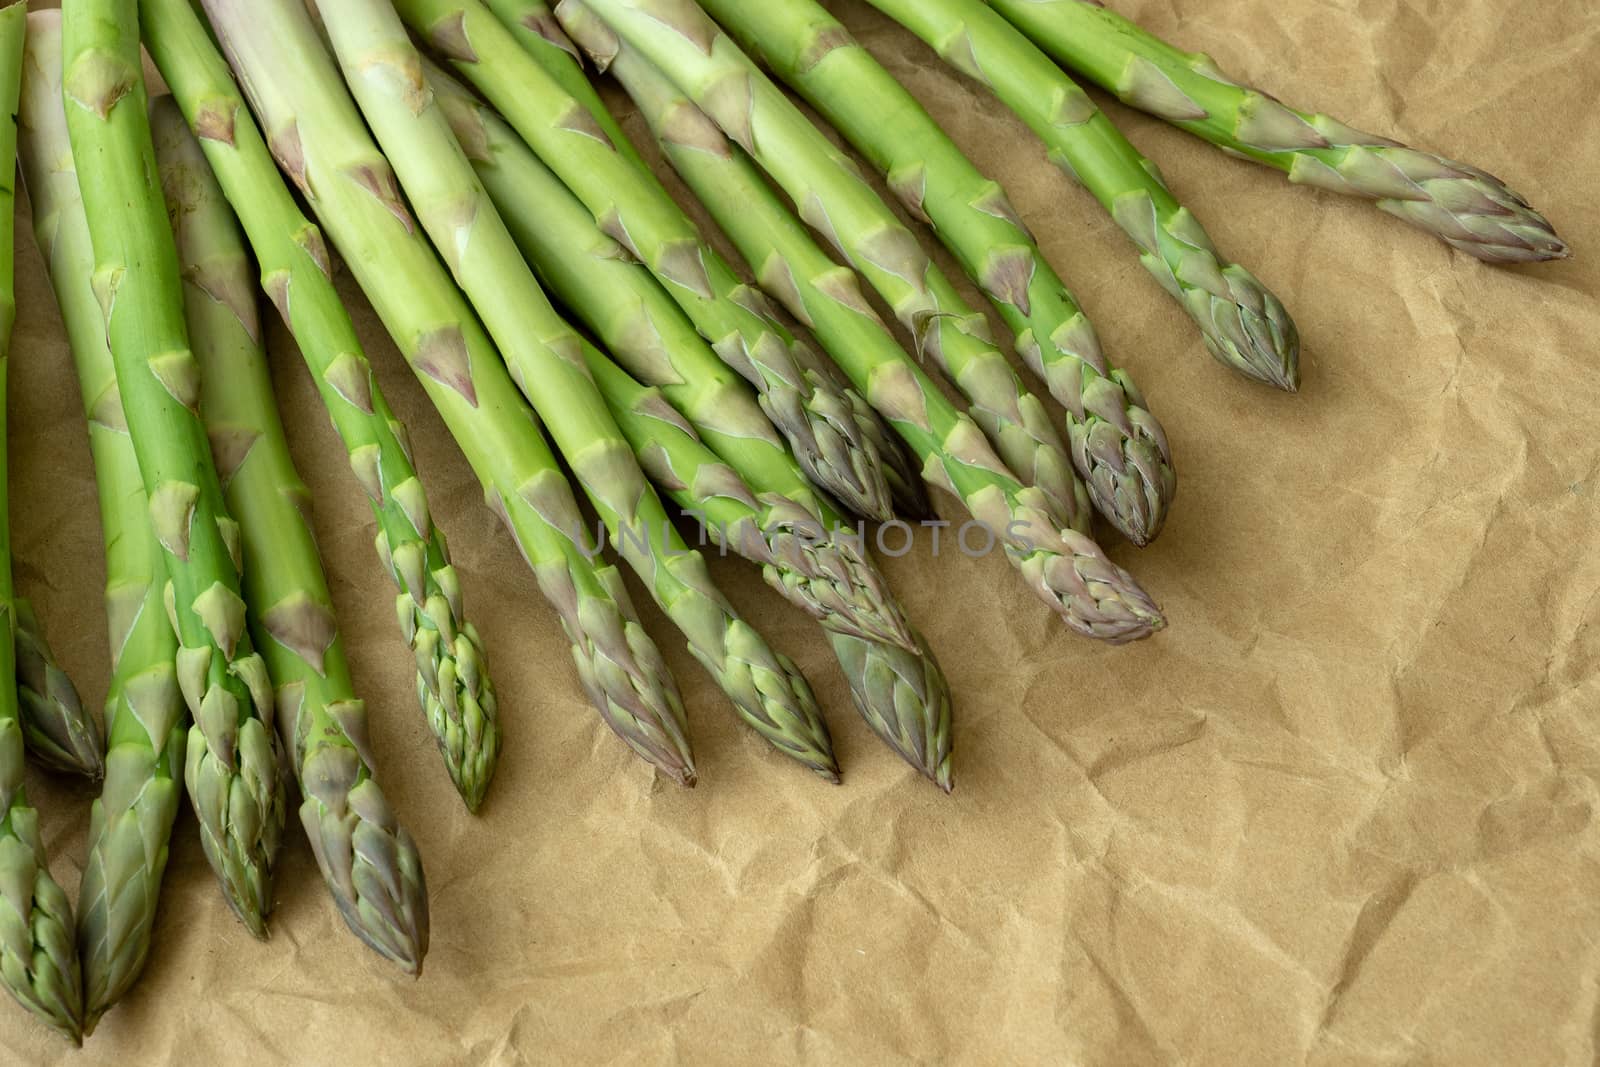 Raw garden asparagus stems. Fresh green spring vegetables on brown wrapping paper. (Asparagus officinalis).